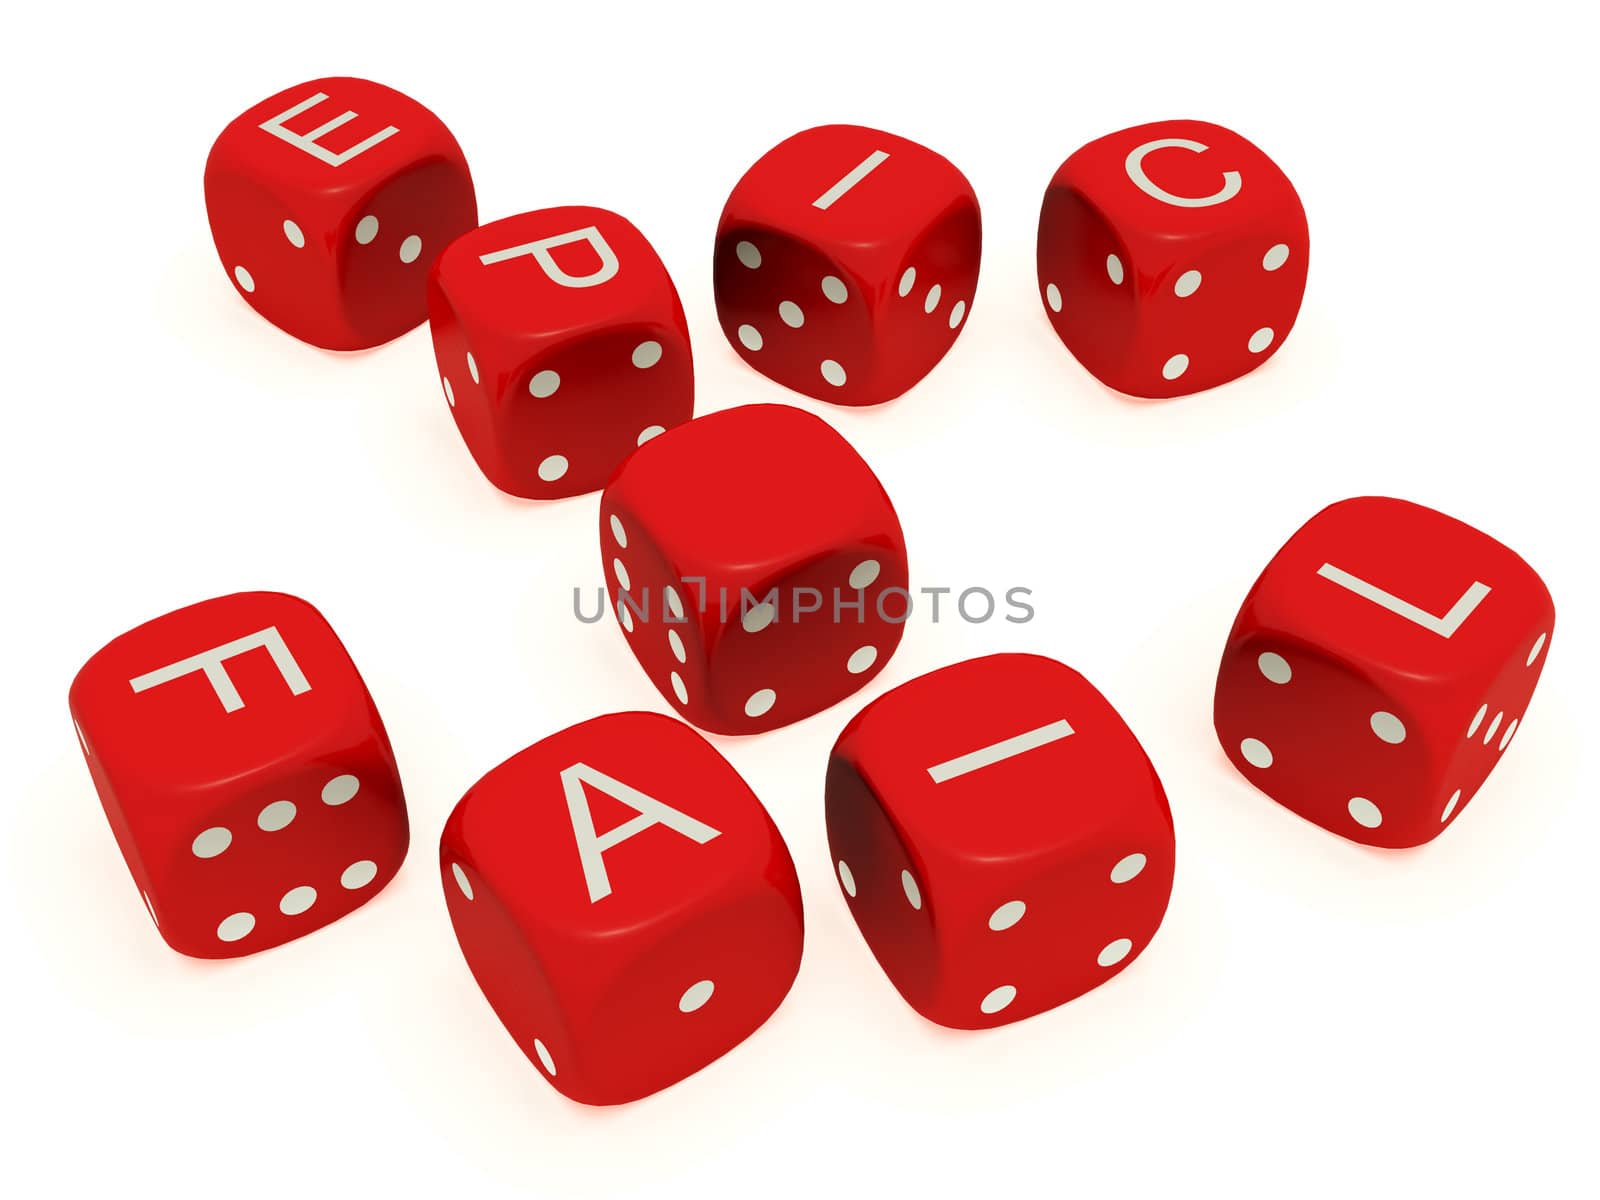 Red dice with labeled "Epic Fail" on the upper plane